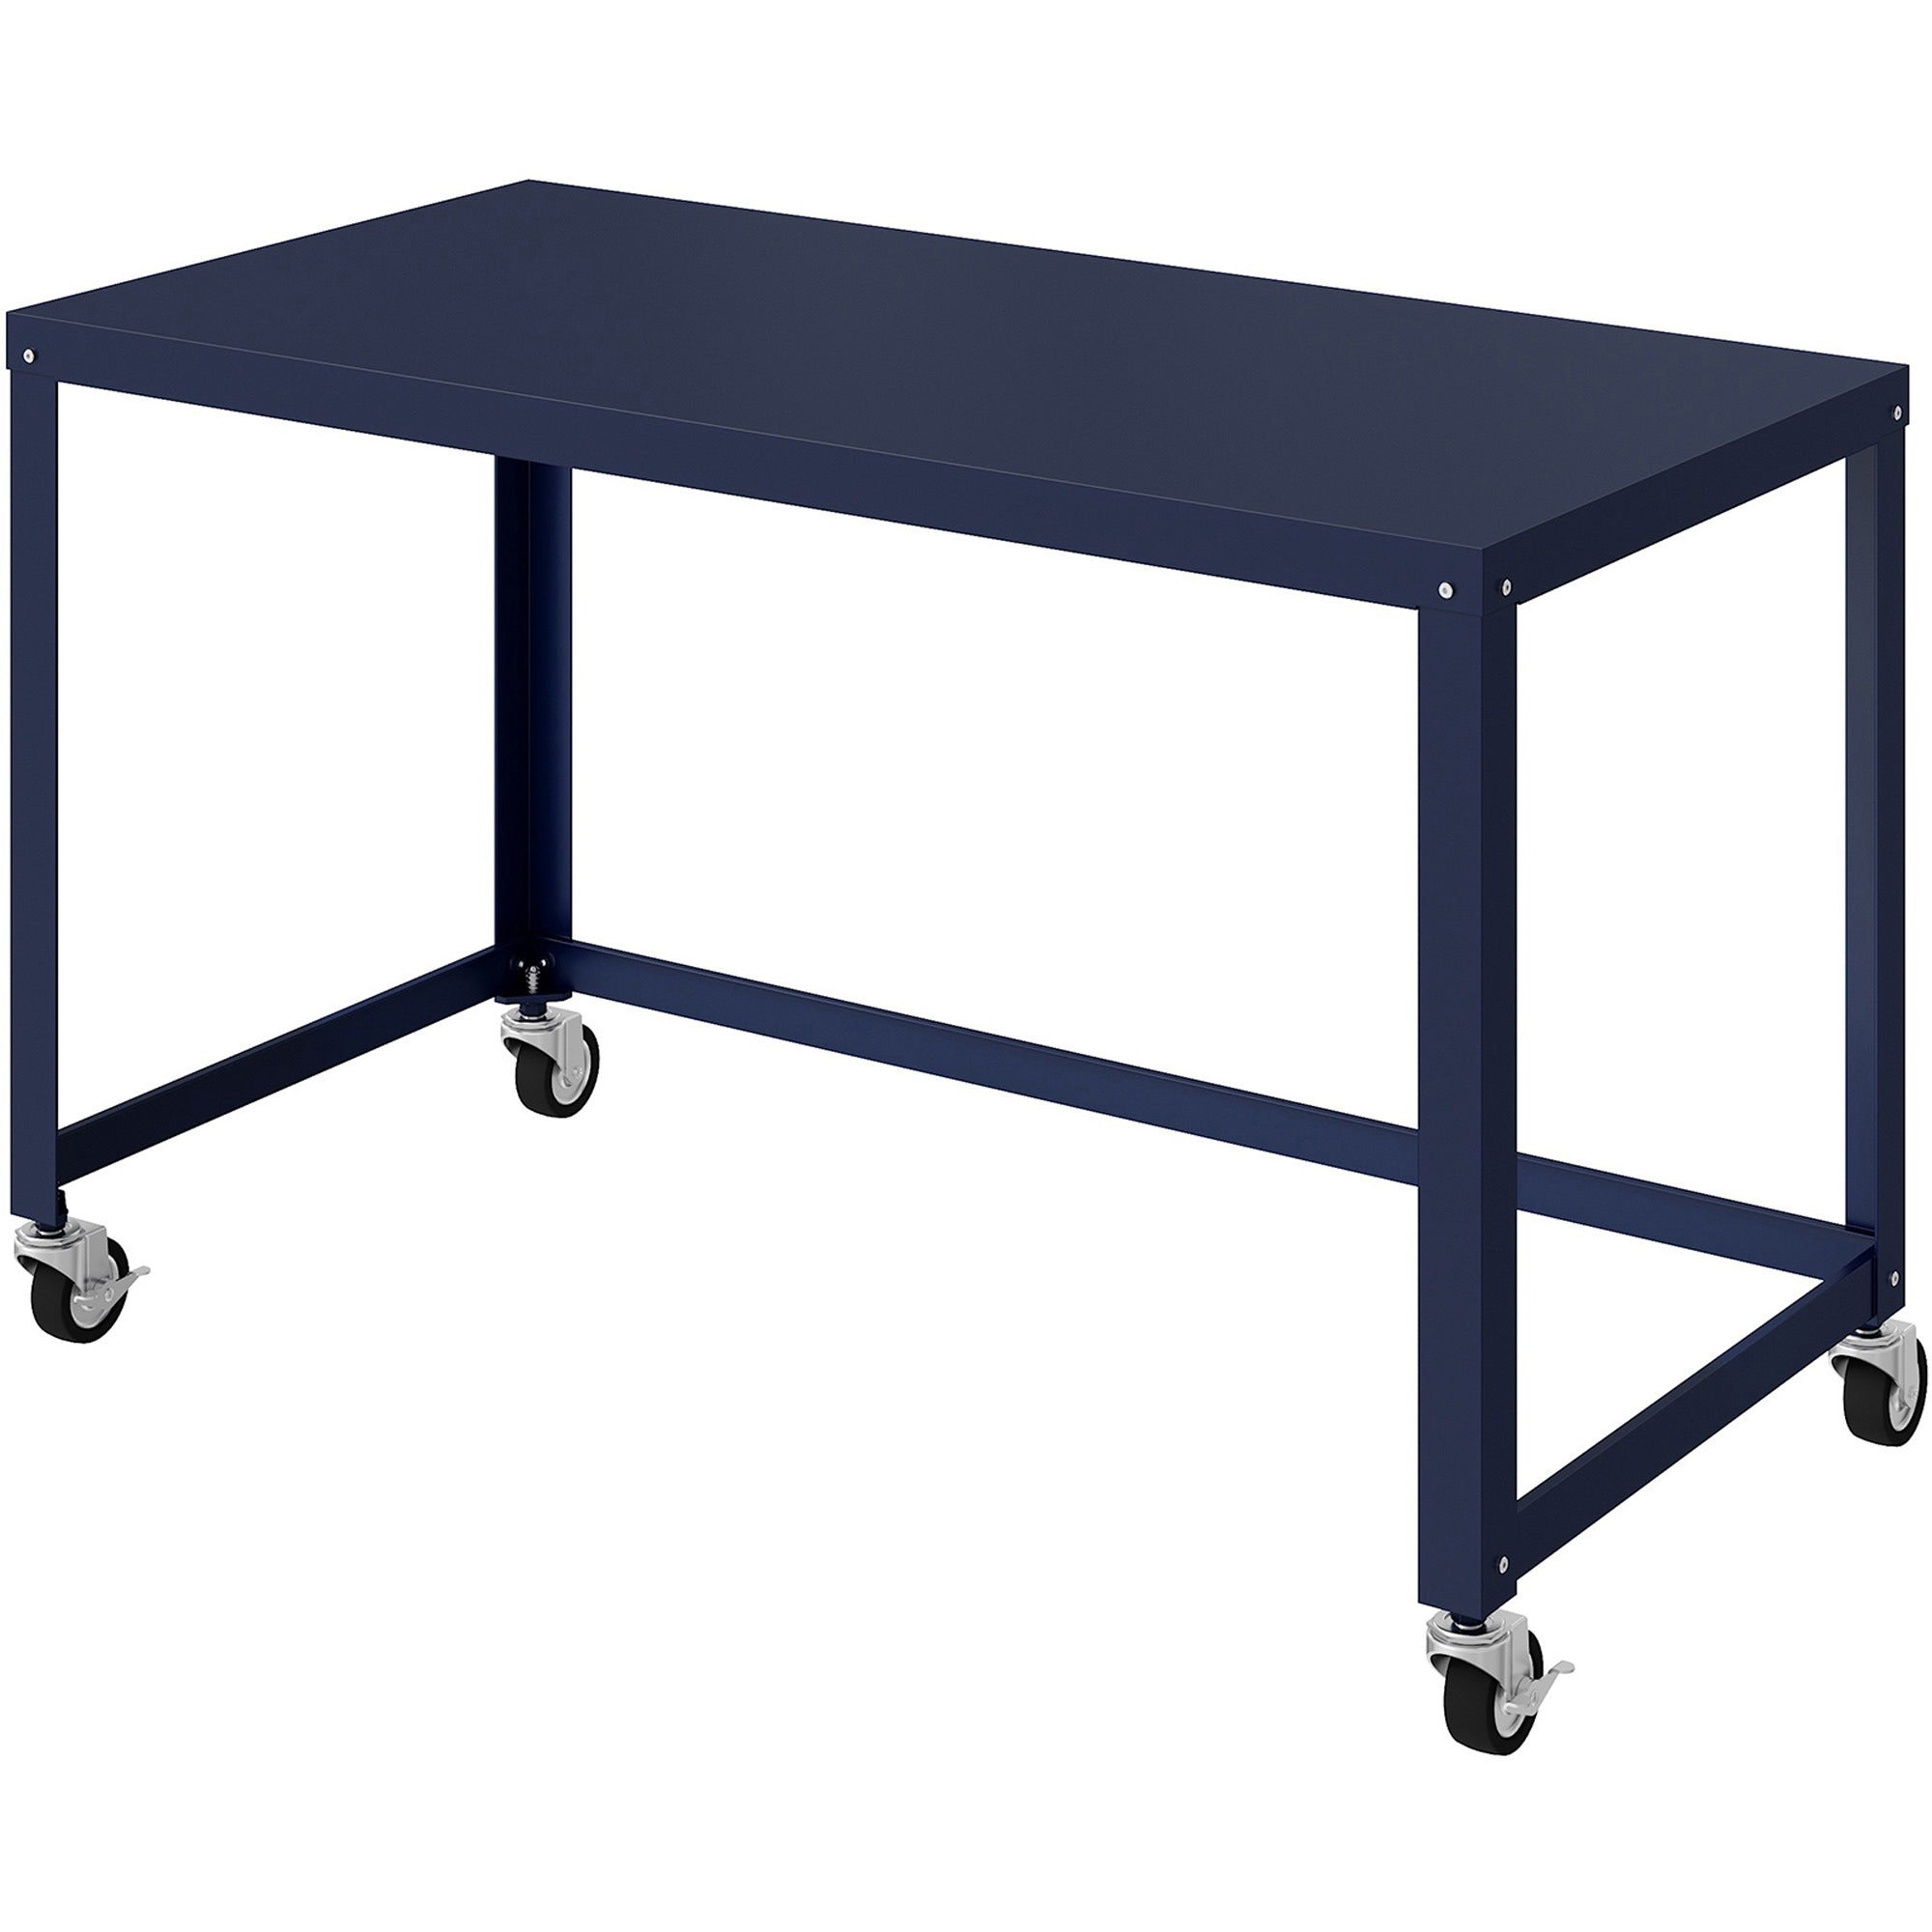 lorell-soho-personal-mobile-desk-for-table-toprectangle-top-200-lb-capacity-48-table-top-length-x-24-table-top-width-30-height-assembly-required-navy-steel-1-each_llr18335 - 3